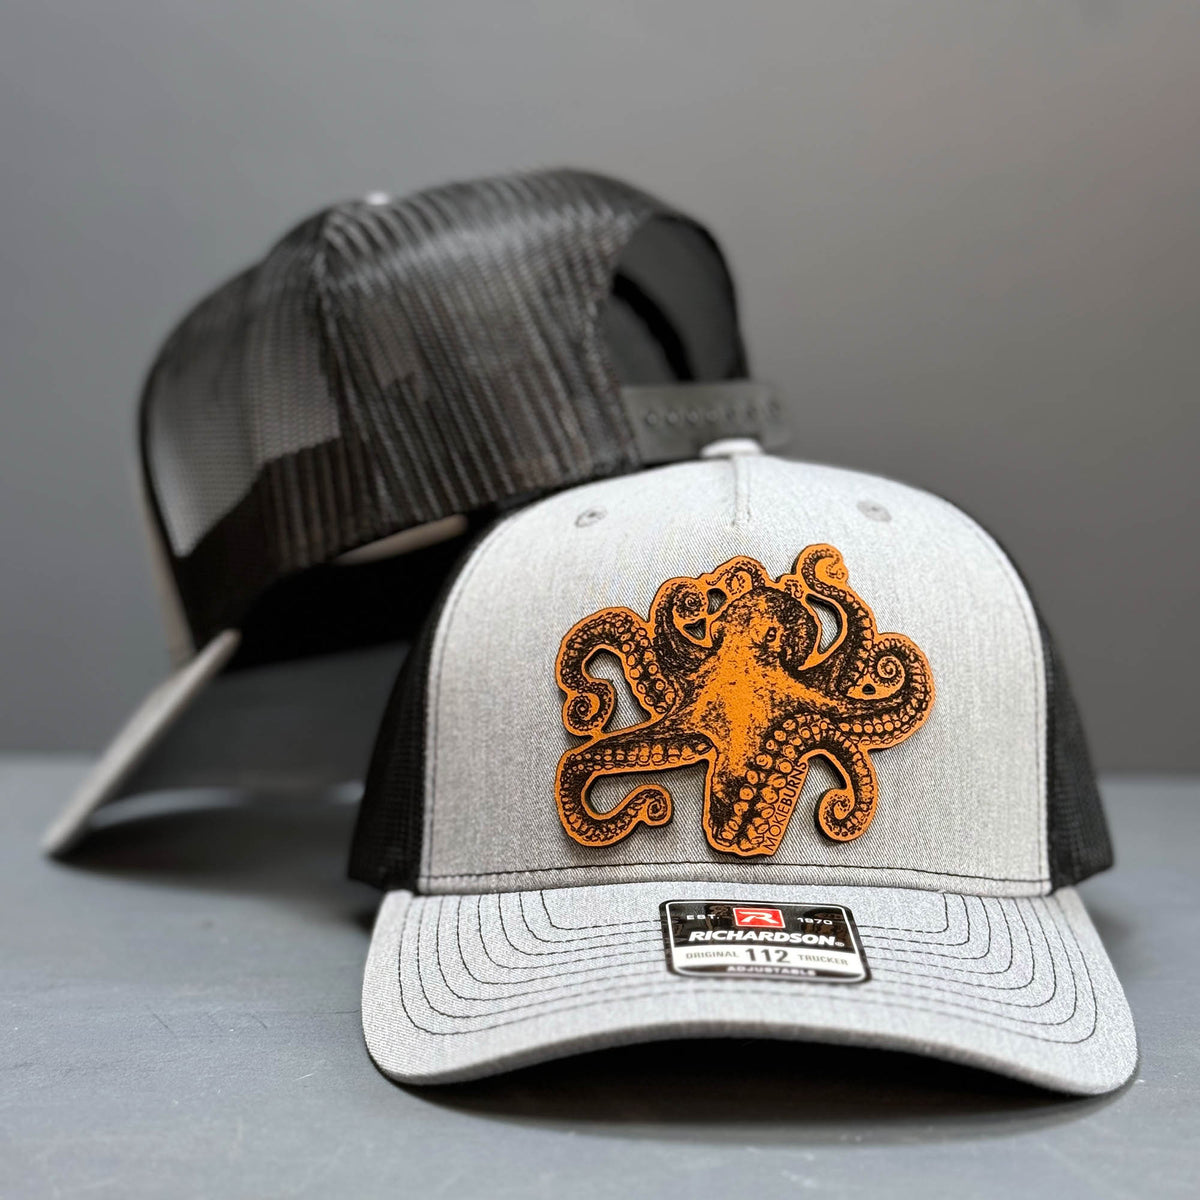 Close-up image of a Richardson 112 trucker hat in heather grey and black, featuring a striking leather patch with an octopus design, also known as &#39;kraken&#39;, perfect for recreational saltwater fishermen seeking a unique and marine-themed cap for their fishing outings.